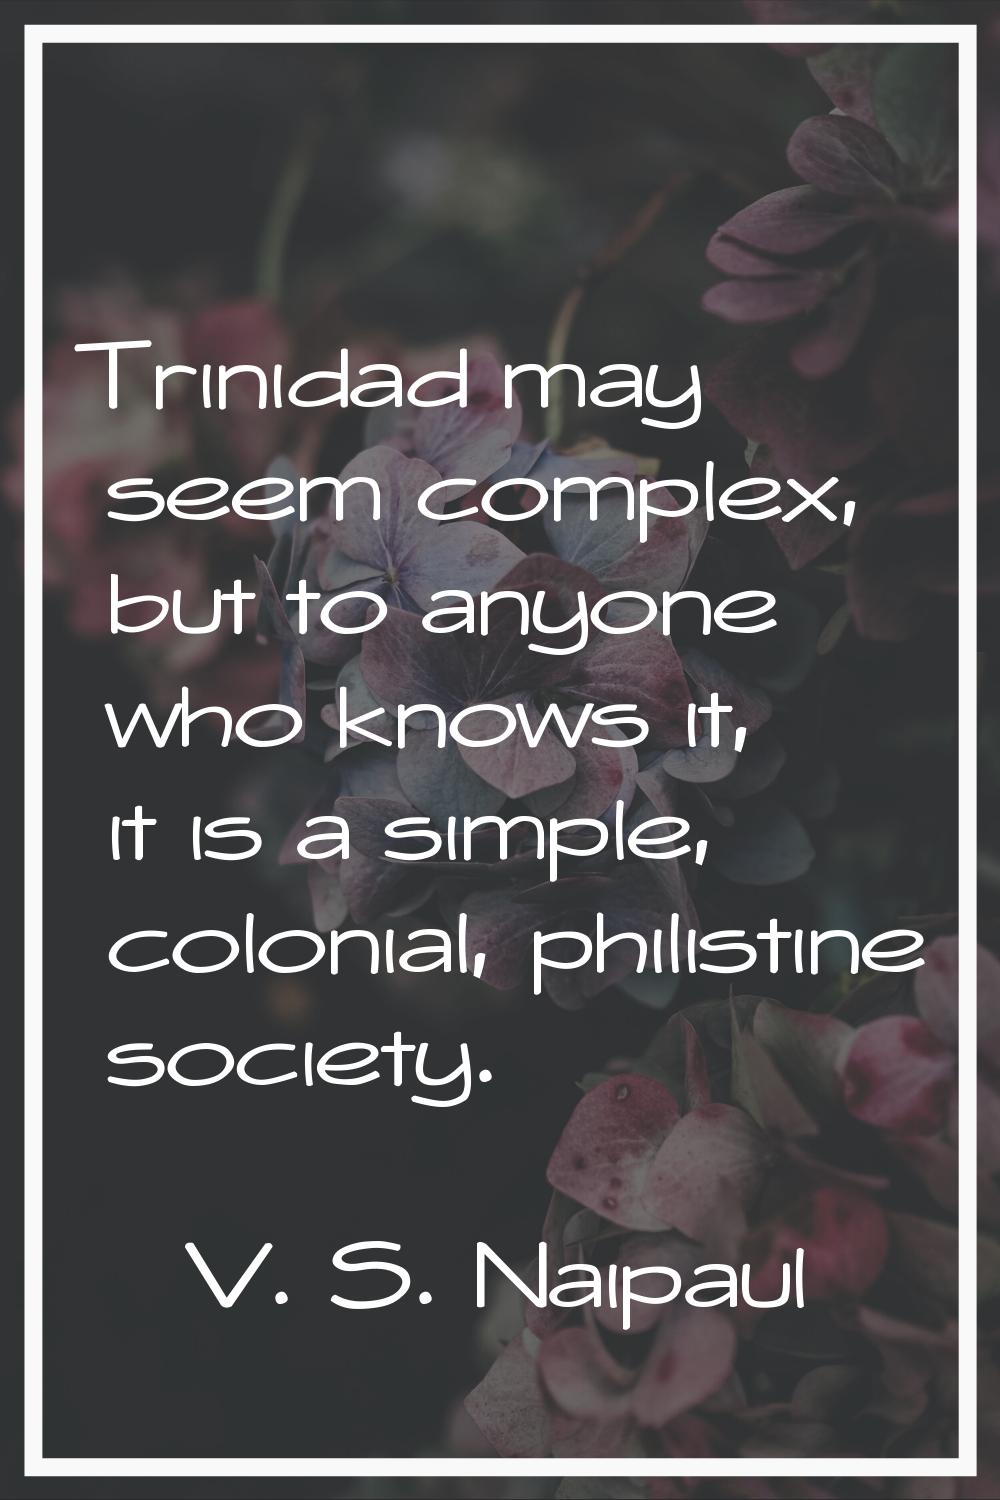 Trinidad may seem complex, but to anyone who knows it, it is a simple, colonial, philistine society